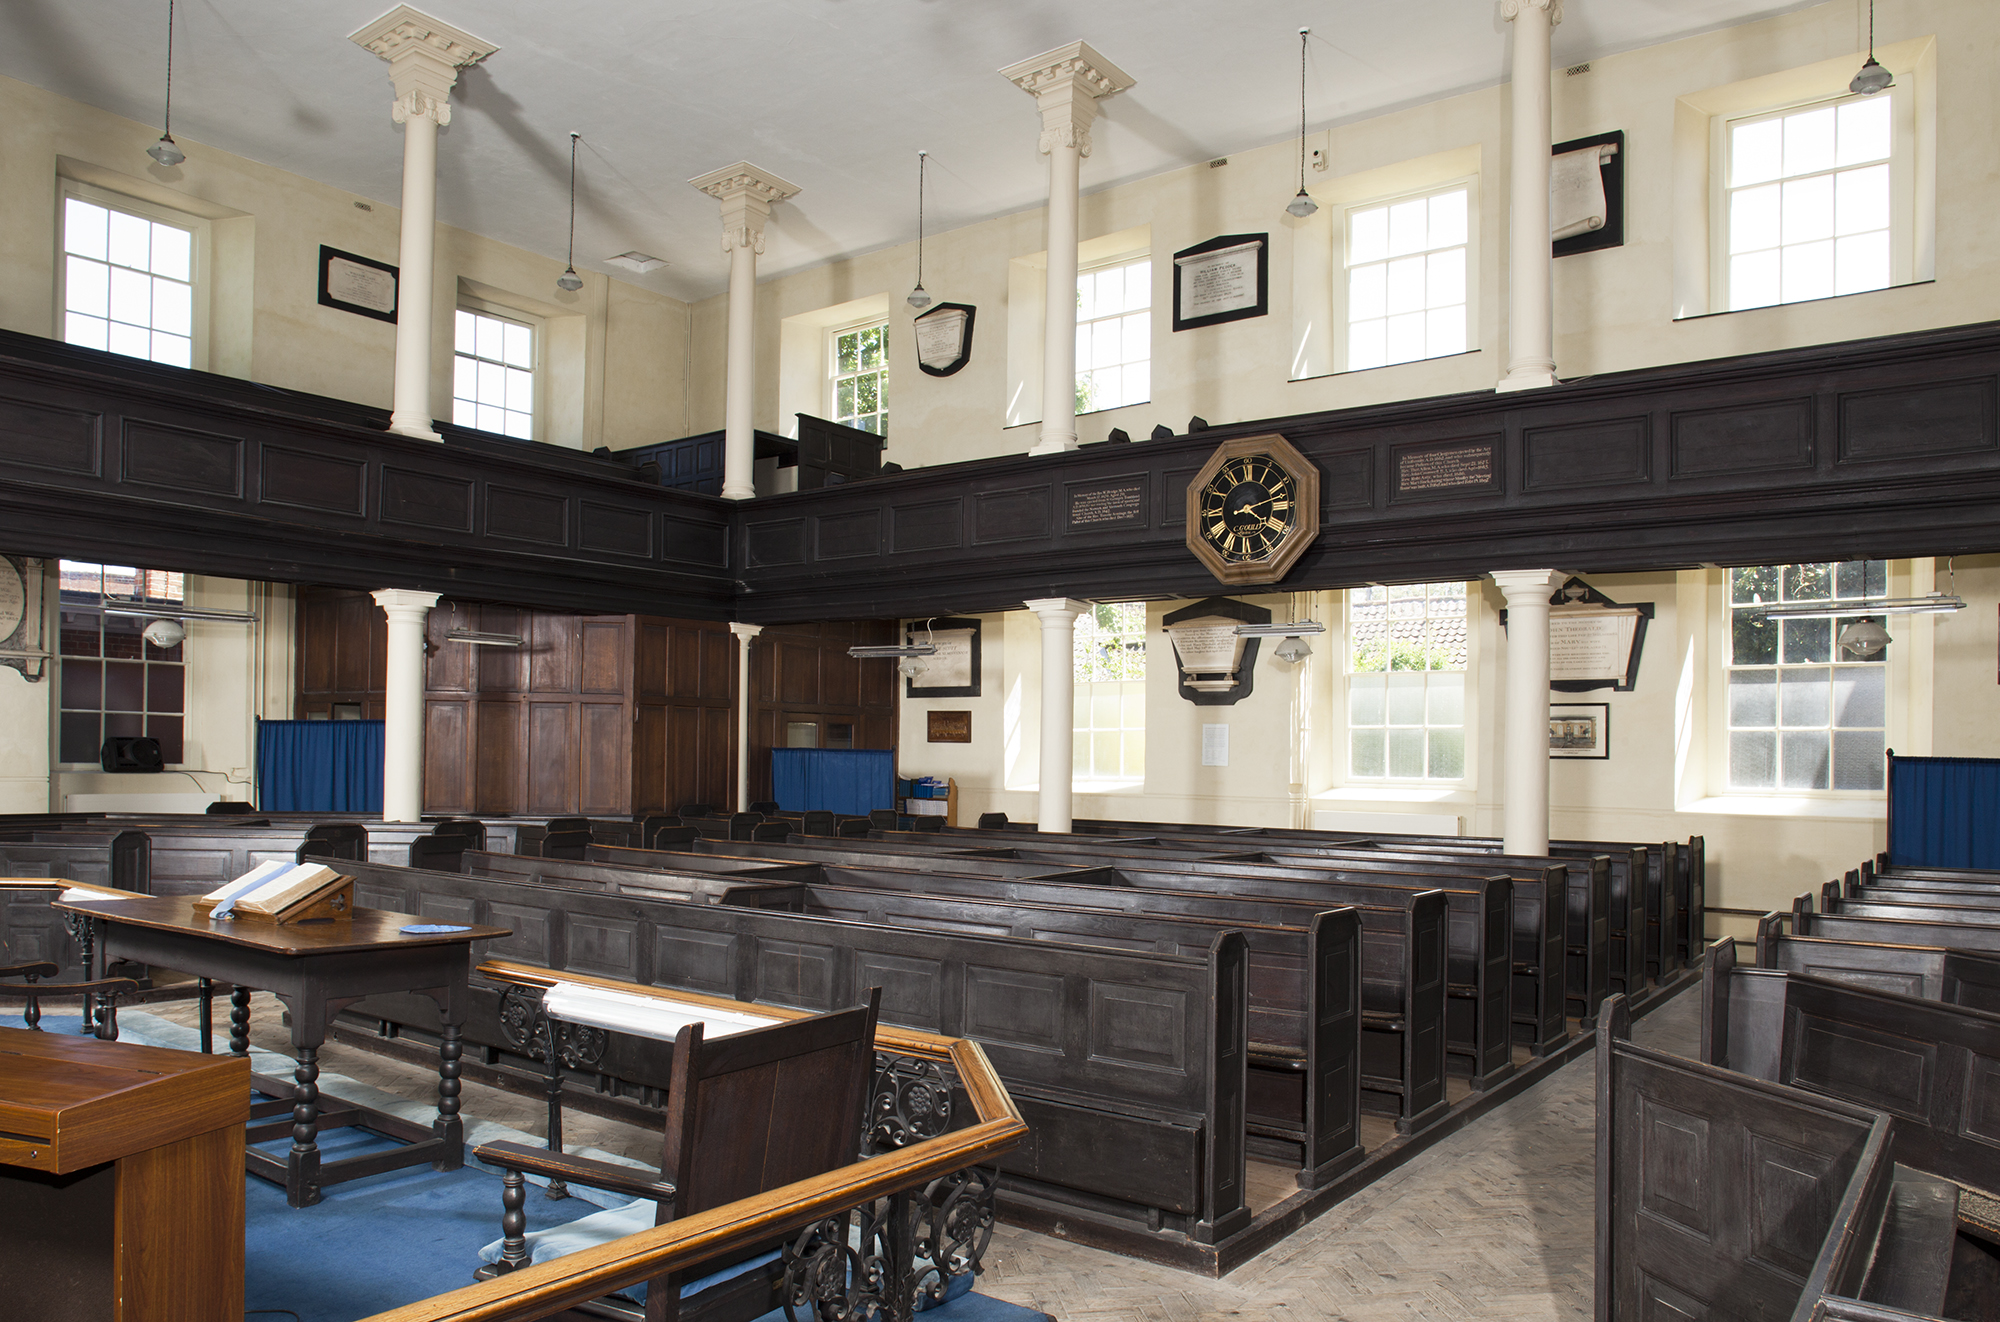 Interior view of the Old Meeting House, Colegate, Norwich.